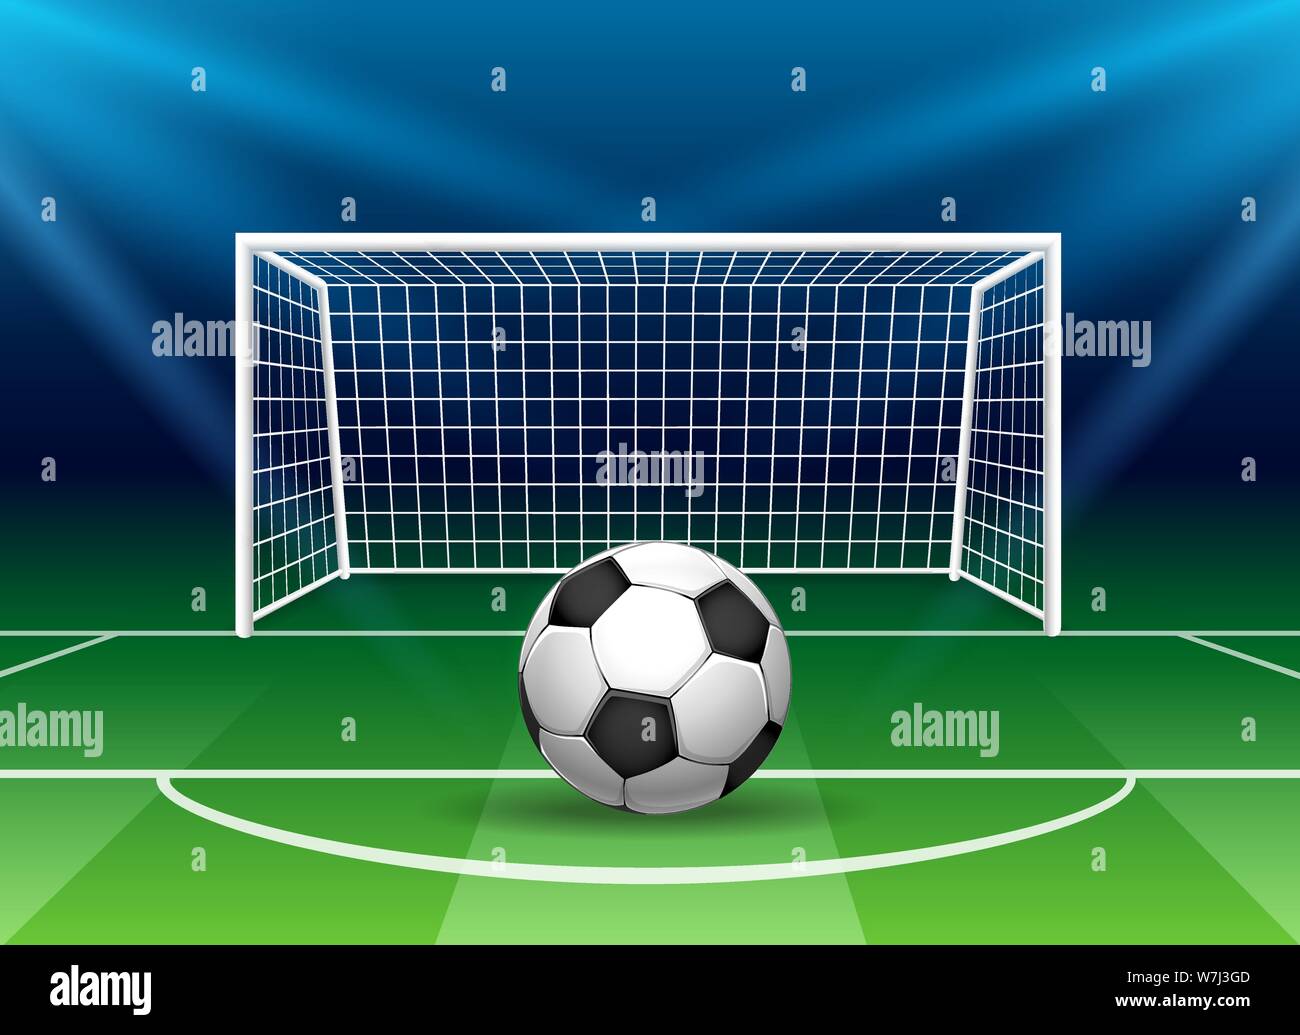 Detail Images Of Football Goal Posts Nomer 16